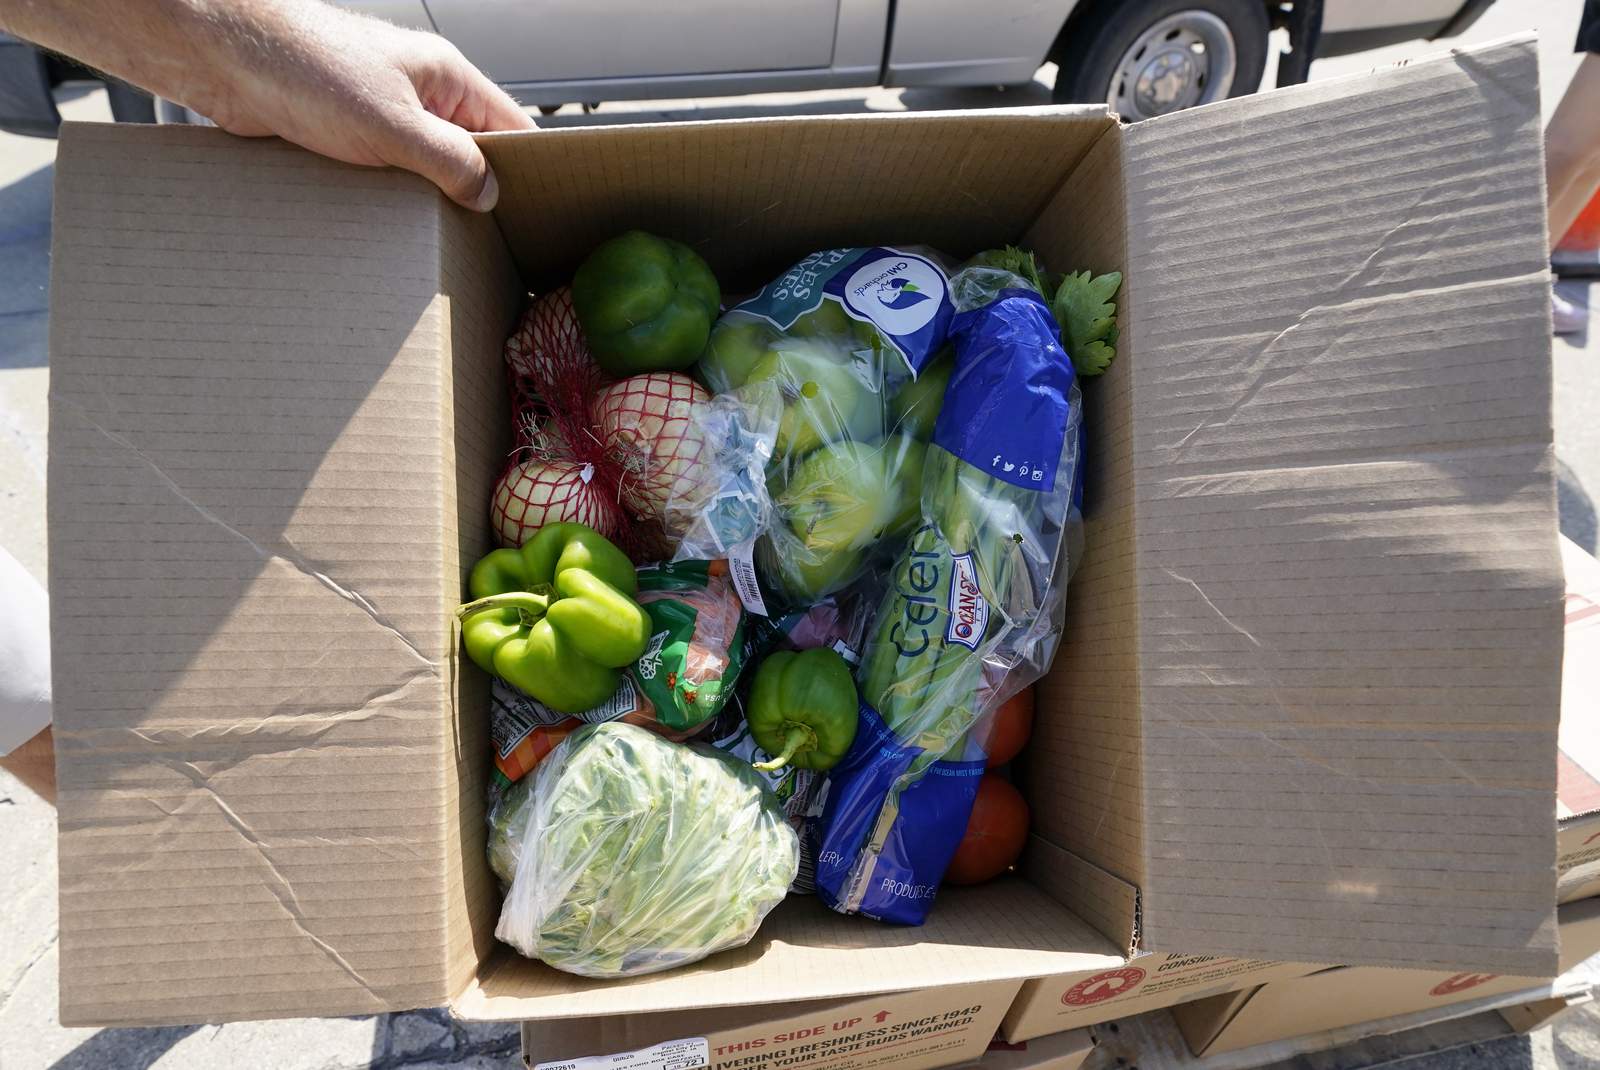 U-M sets up mobile food pantry on North Campus twice a month